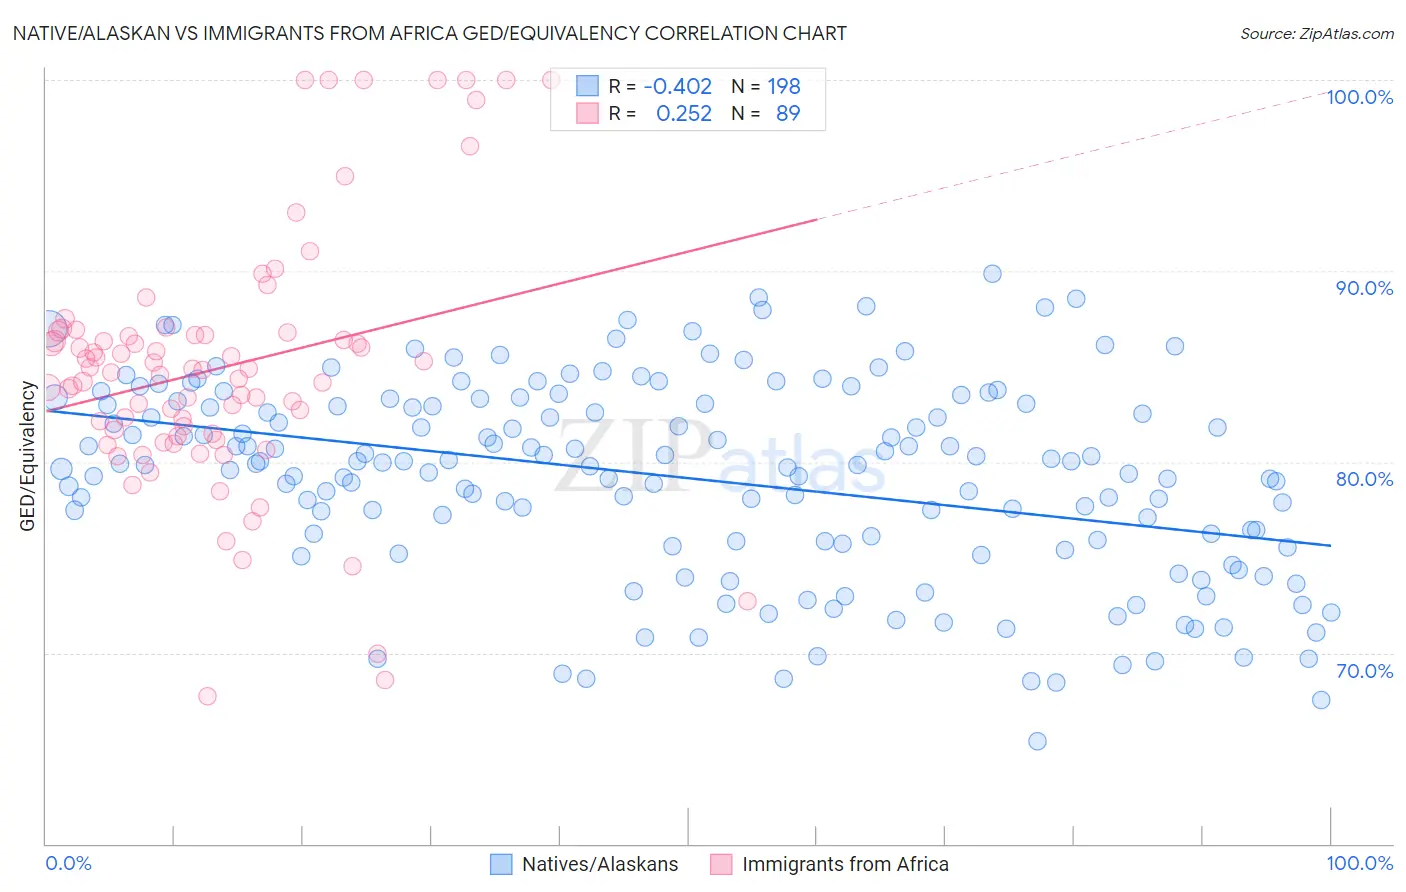 Native/Alaskan vs Immigrants from Africa GED/Equivalency